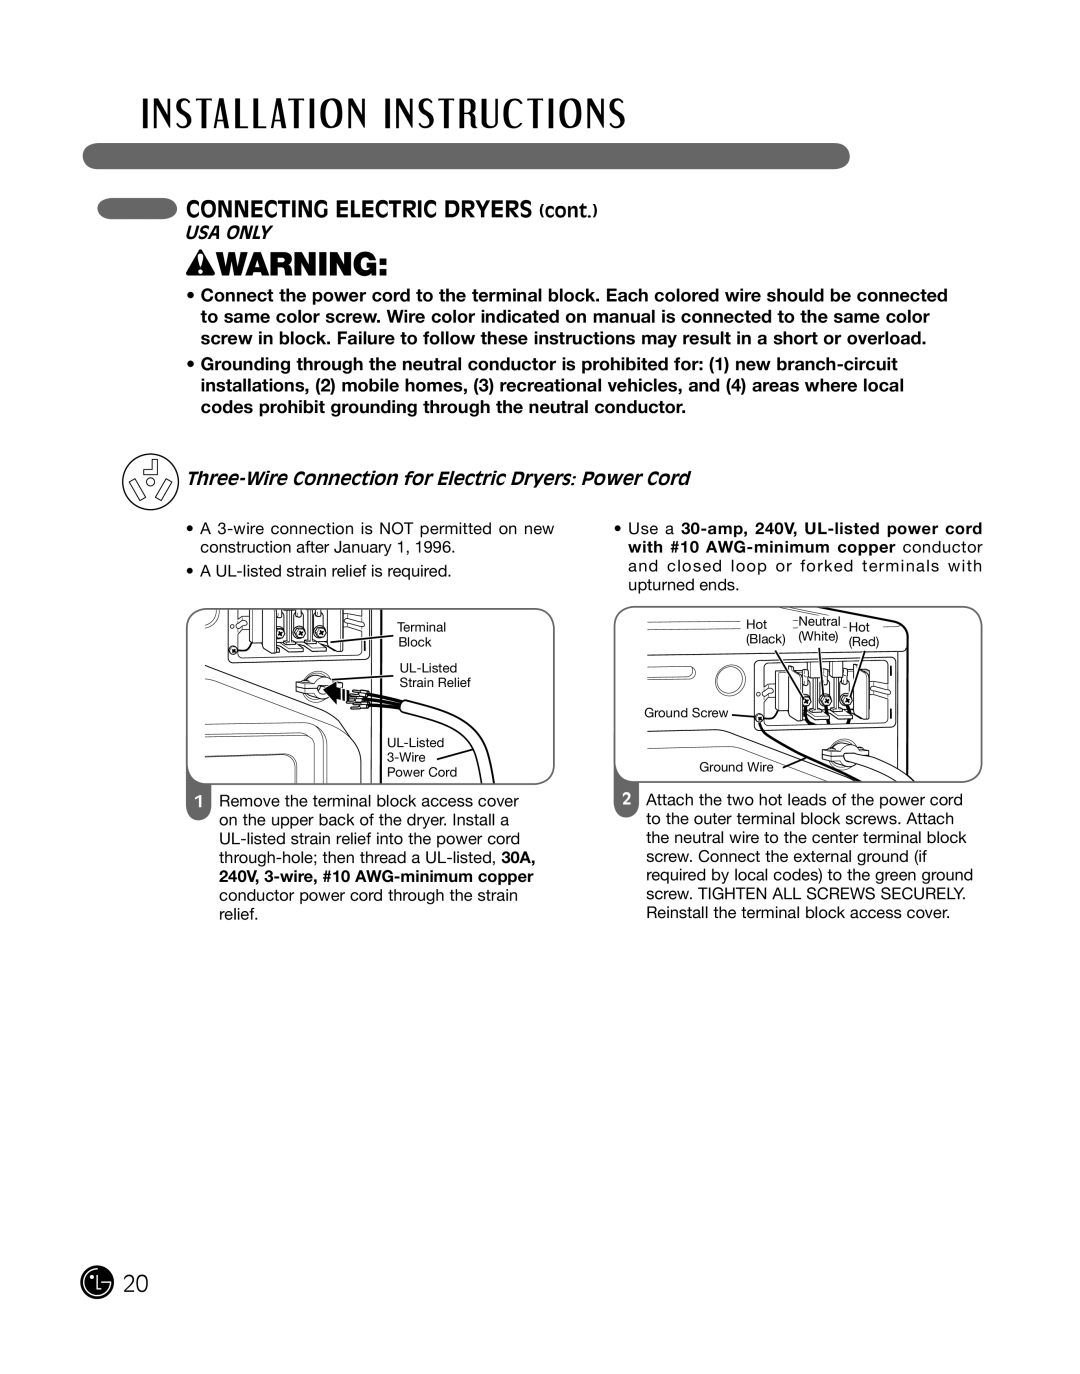 LG Electronics D2102S Three-Wire Connection for Electric Dryers Power Cord, wWARNING, CONNECTING ELECTRIC DRYERS cont 